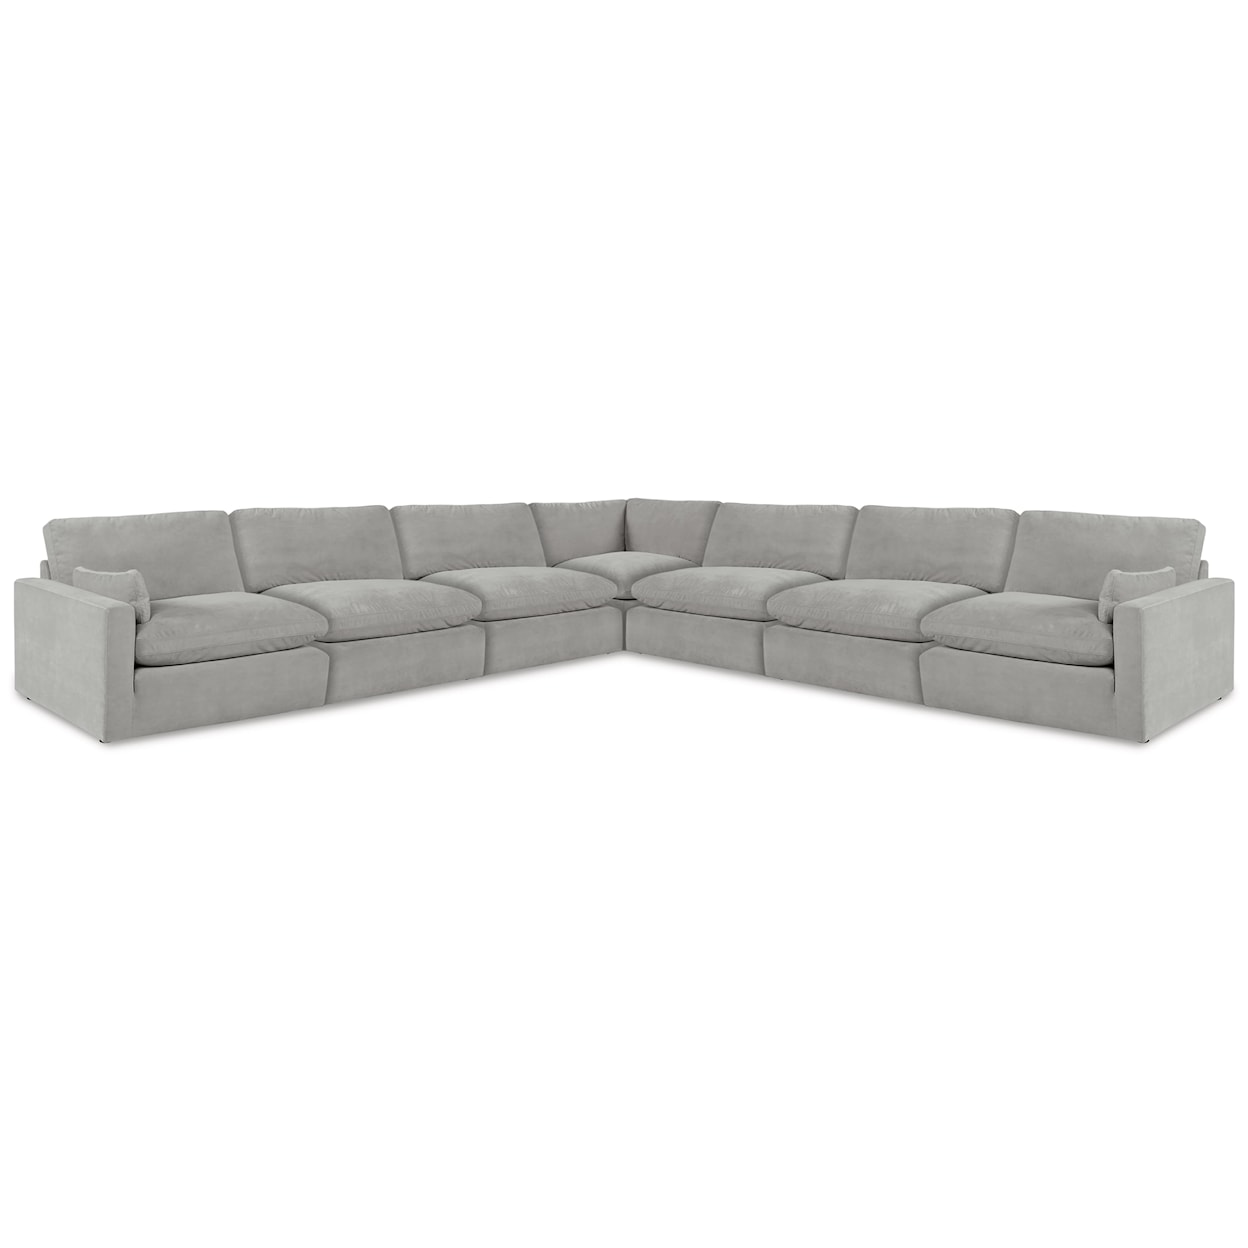 Signature Design by Ashley Furniture Sophie 7-Piece Sectional